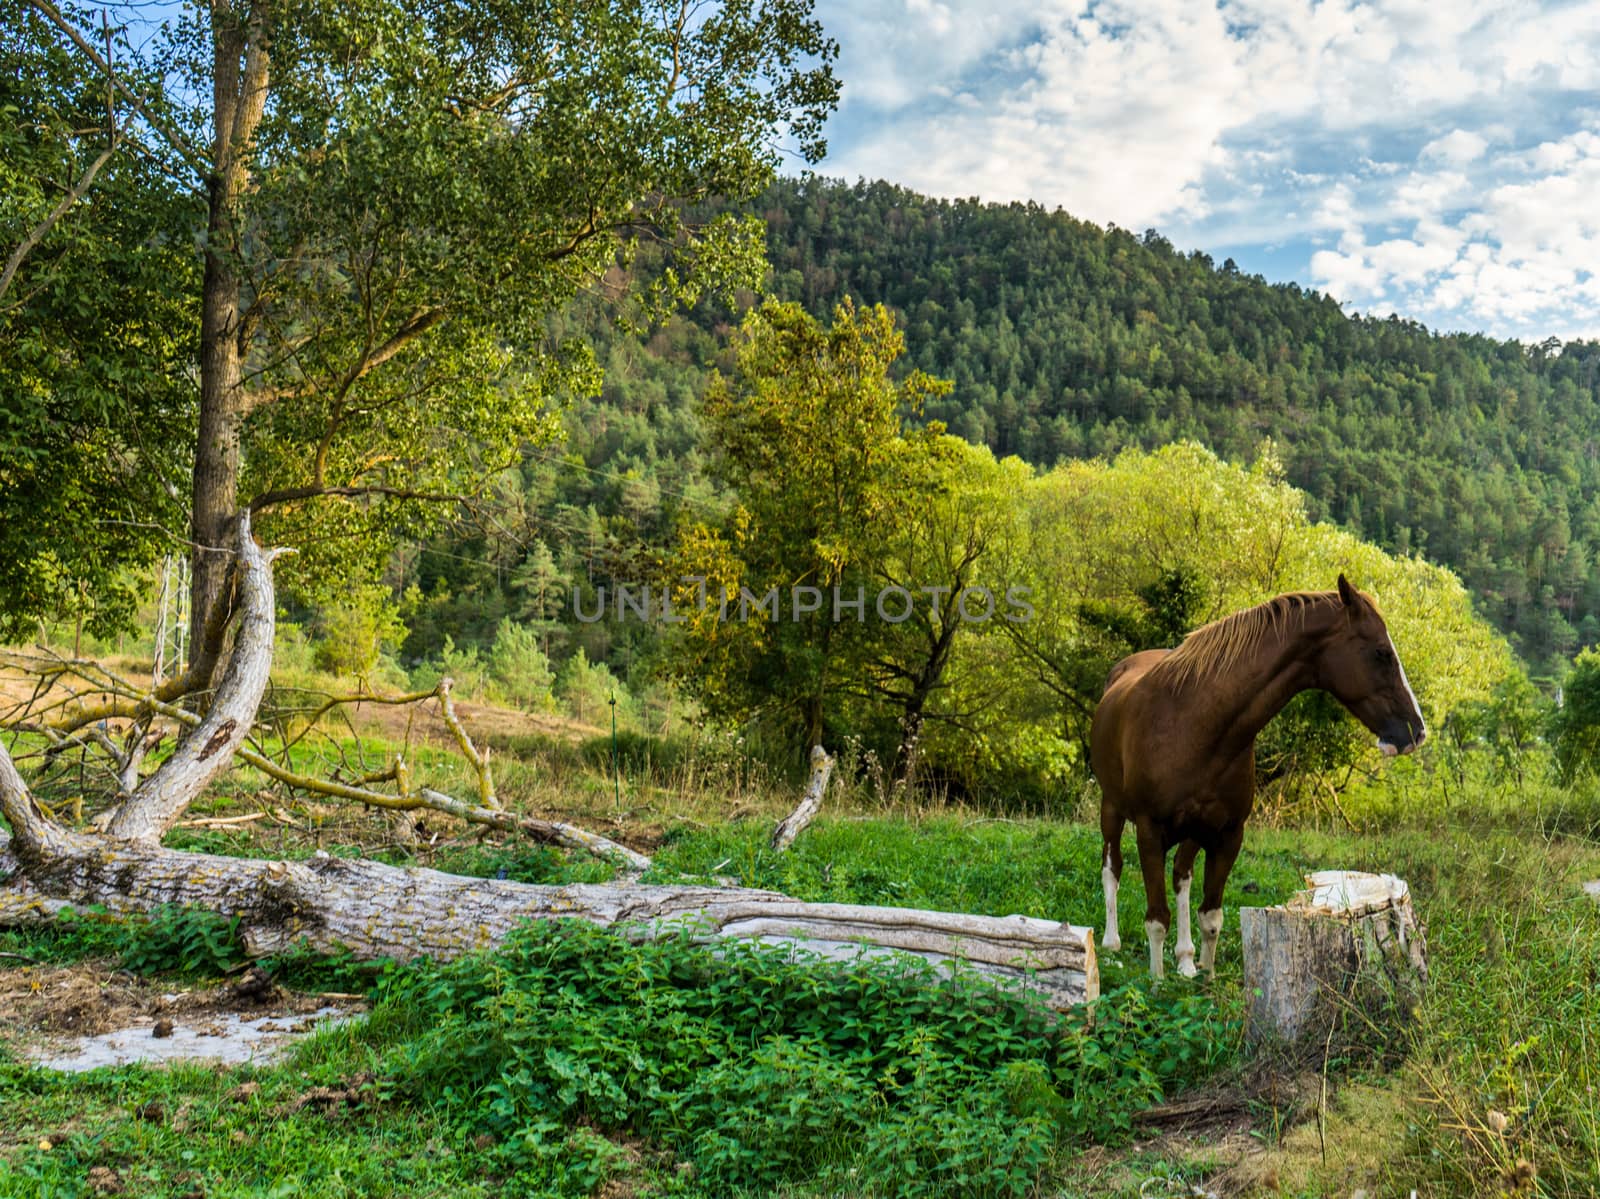 domestic horse roams freely amist nature in a natural park a couple of hours away from Barcelona, Spain.